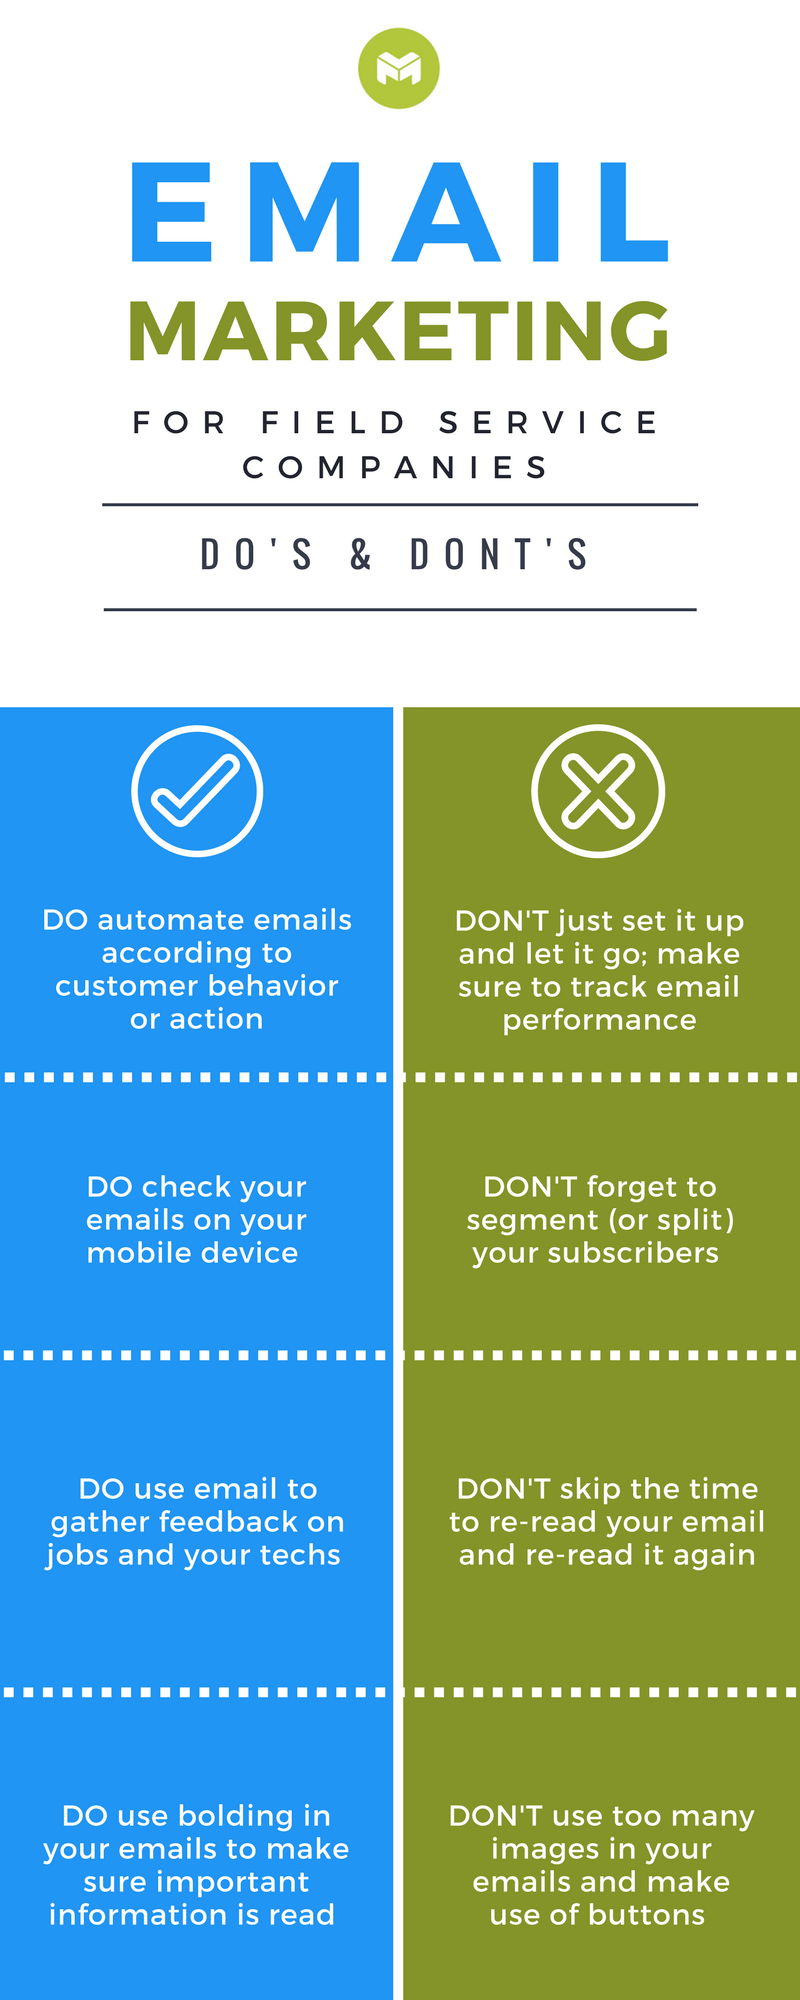 Email Marketing for Field Service Companies - Part 2